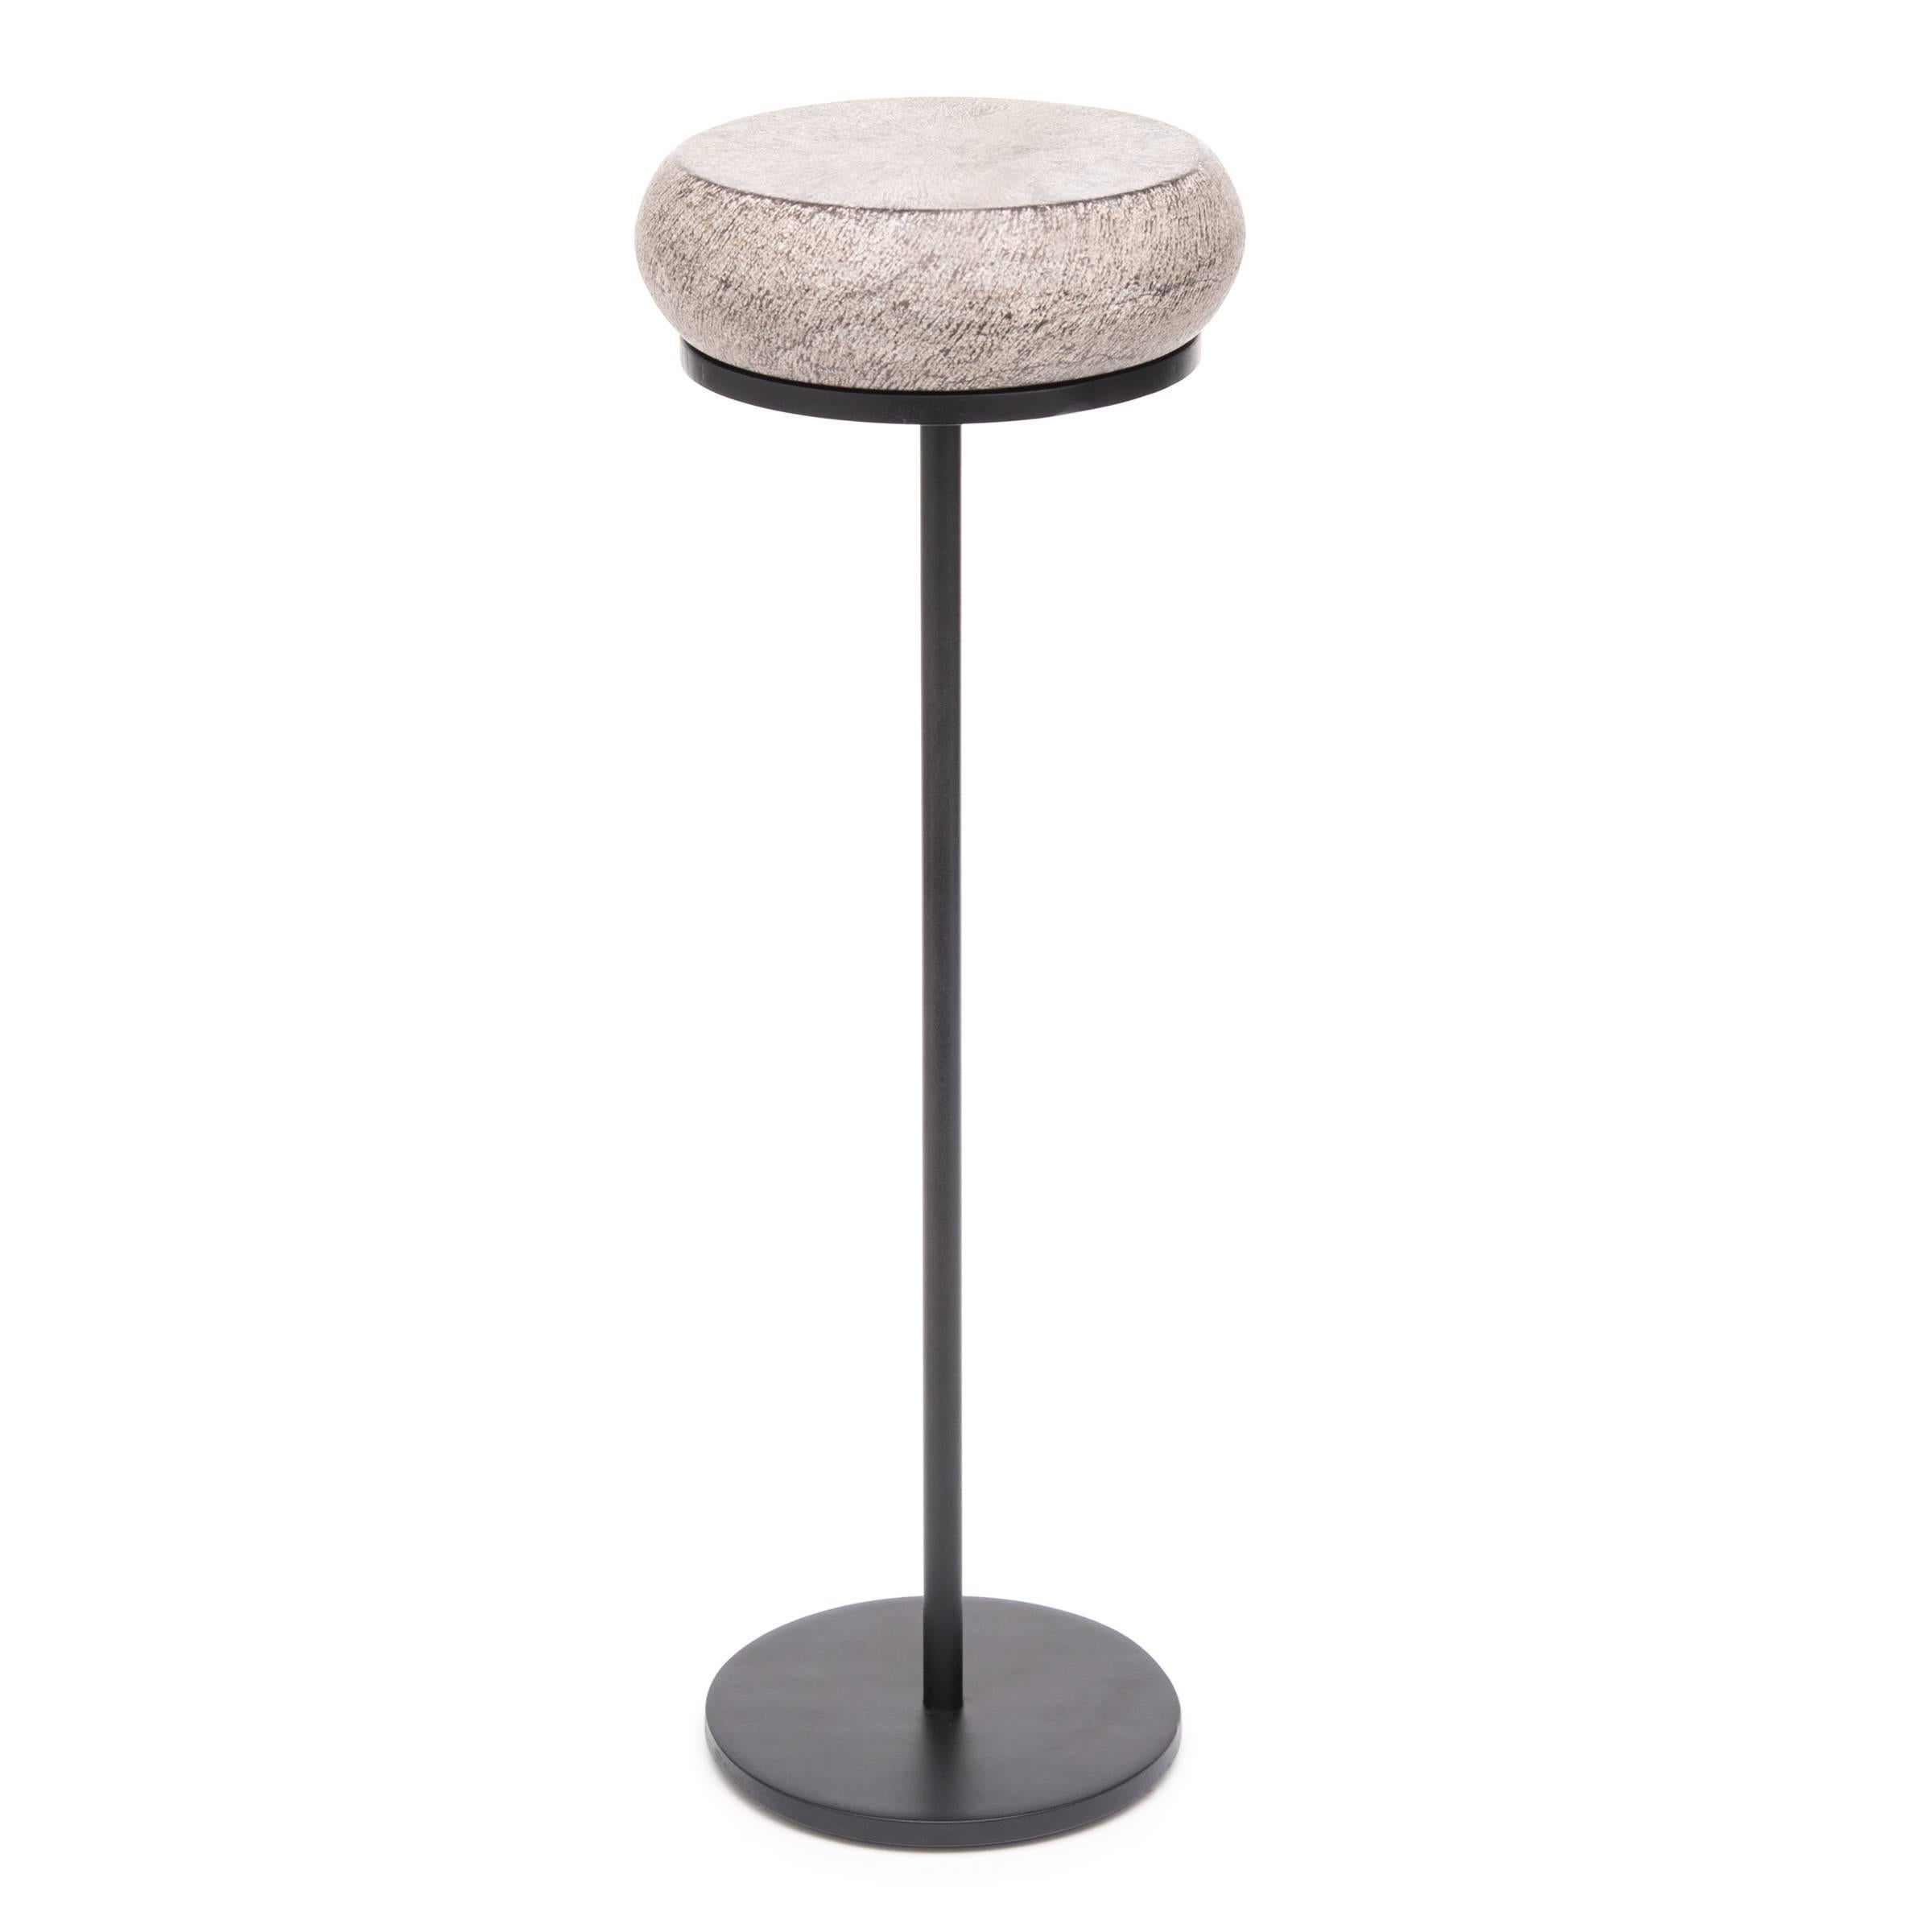 Contemporary Chinese Petite Stone Drum Table